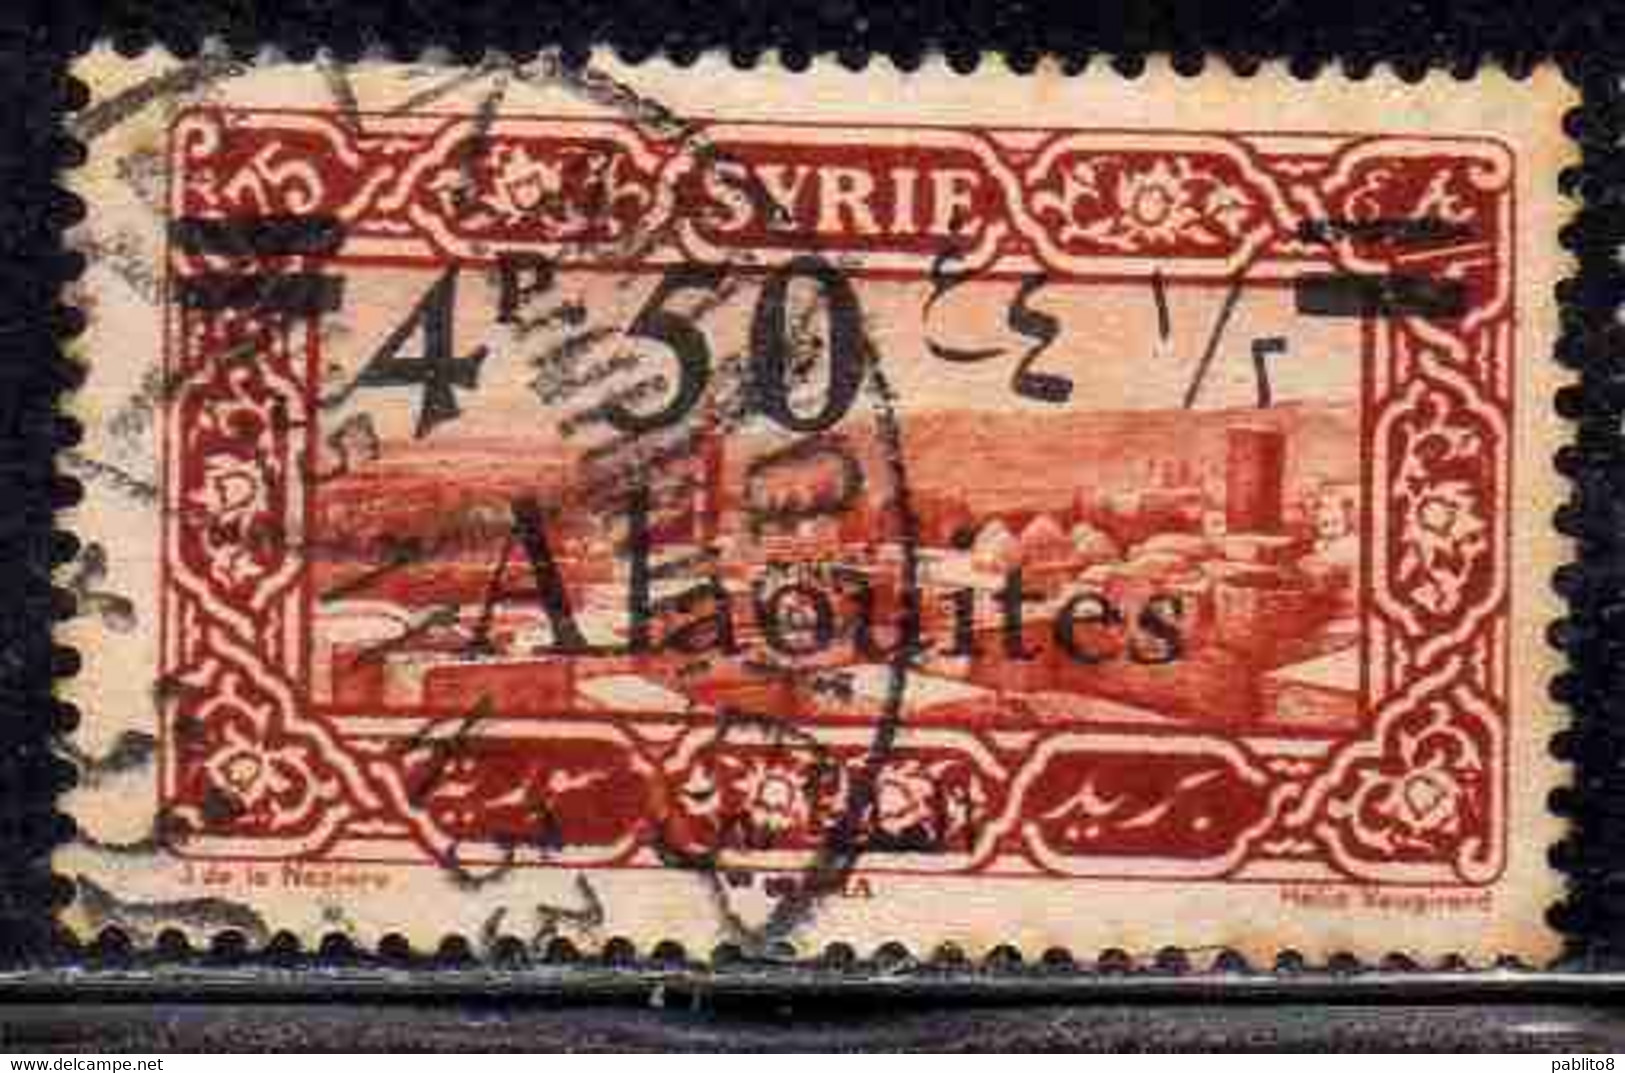 ALAOUITES SYRIA SIRIA ALAQUITES 1926 BRIDGE OF DAPHNE SURCHARGED 4.50p On 3p USED USATO OBLITERE' - Used Stamps